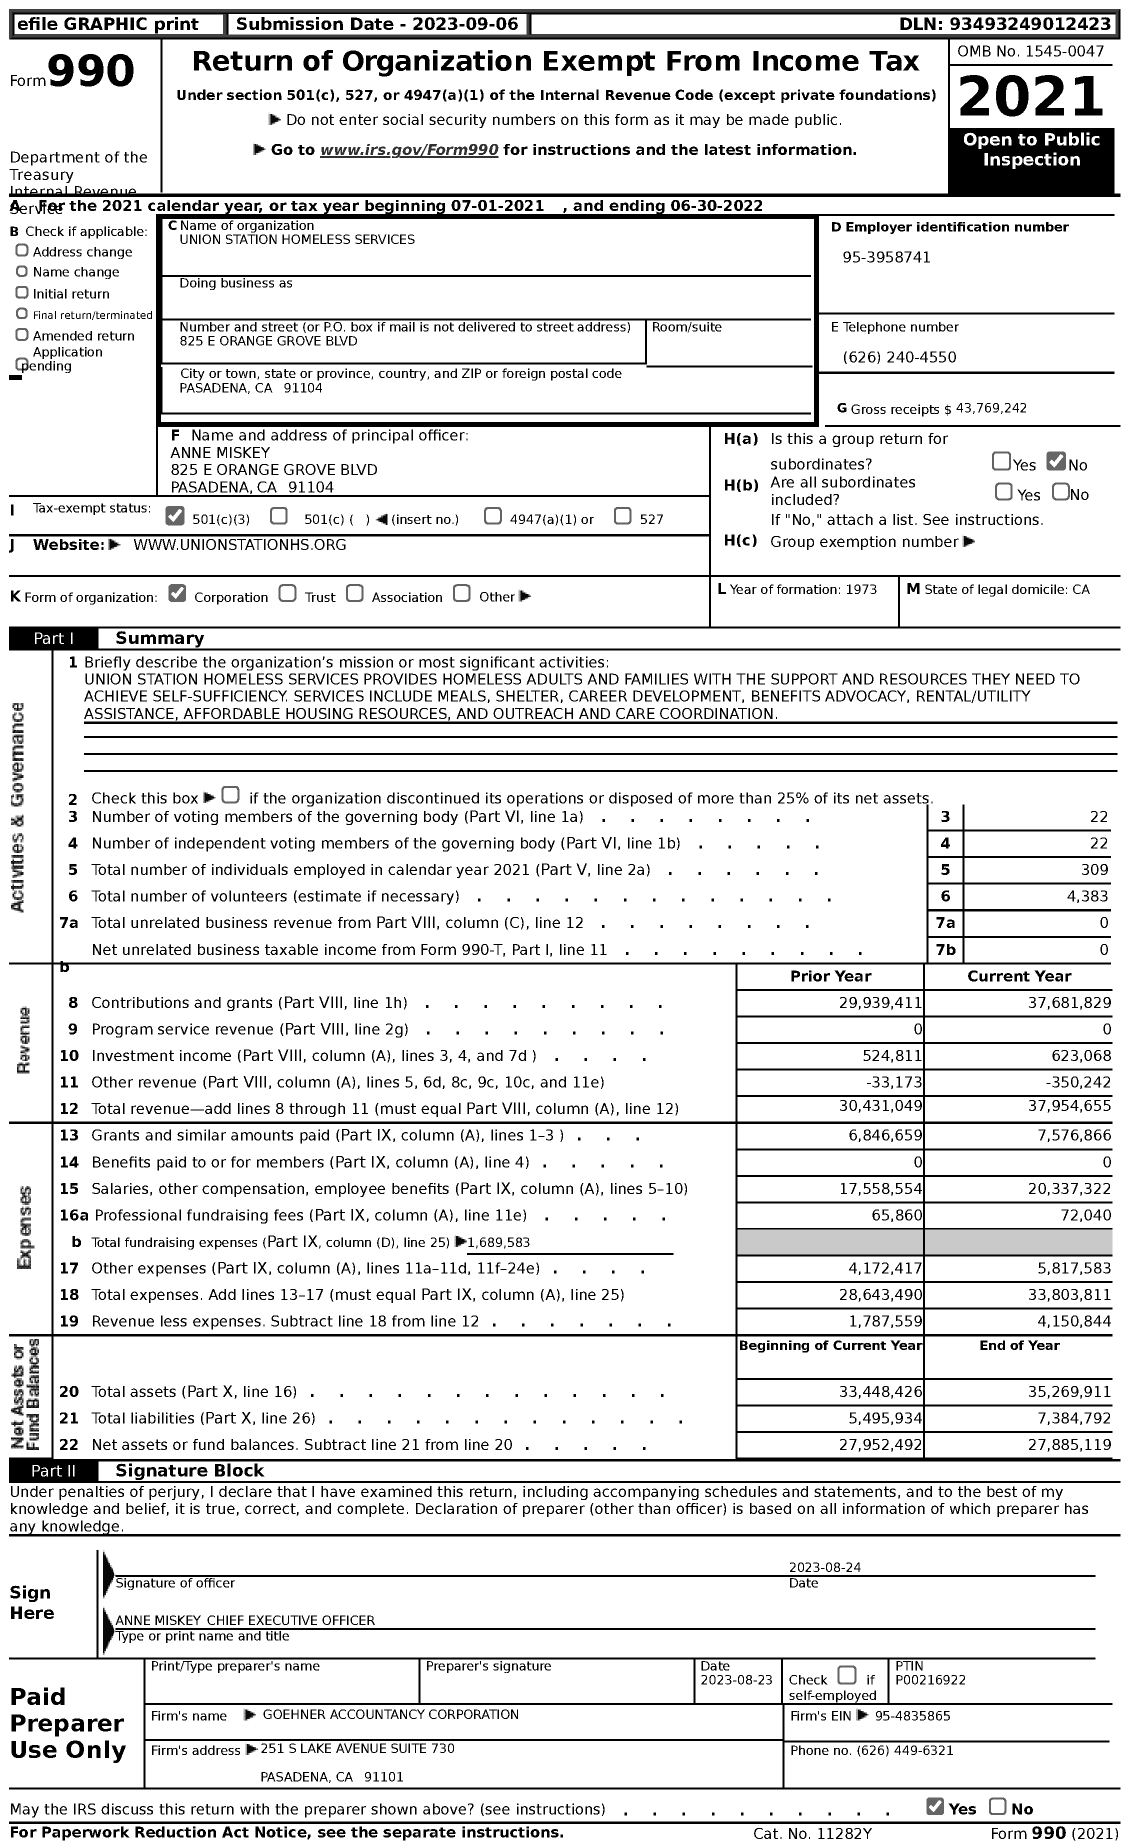 Image of first page of 2021 Form 990 for Union Station Homeless Services